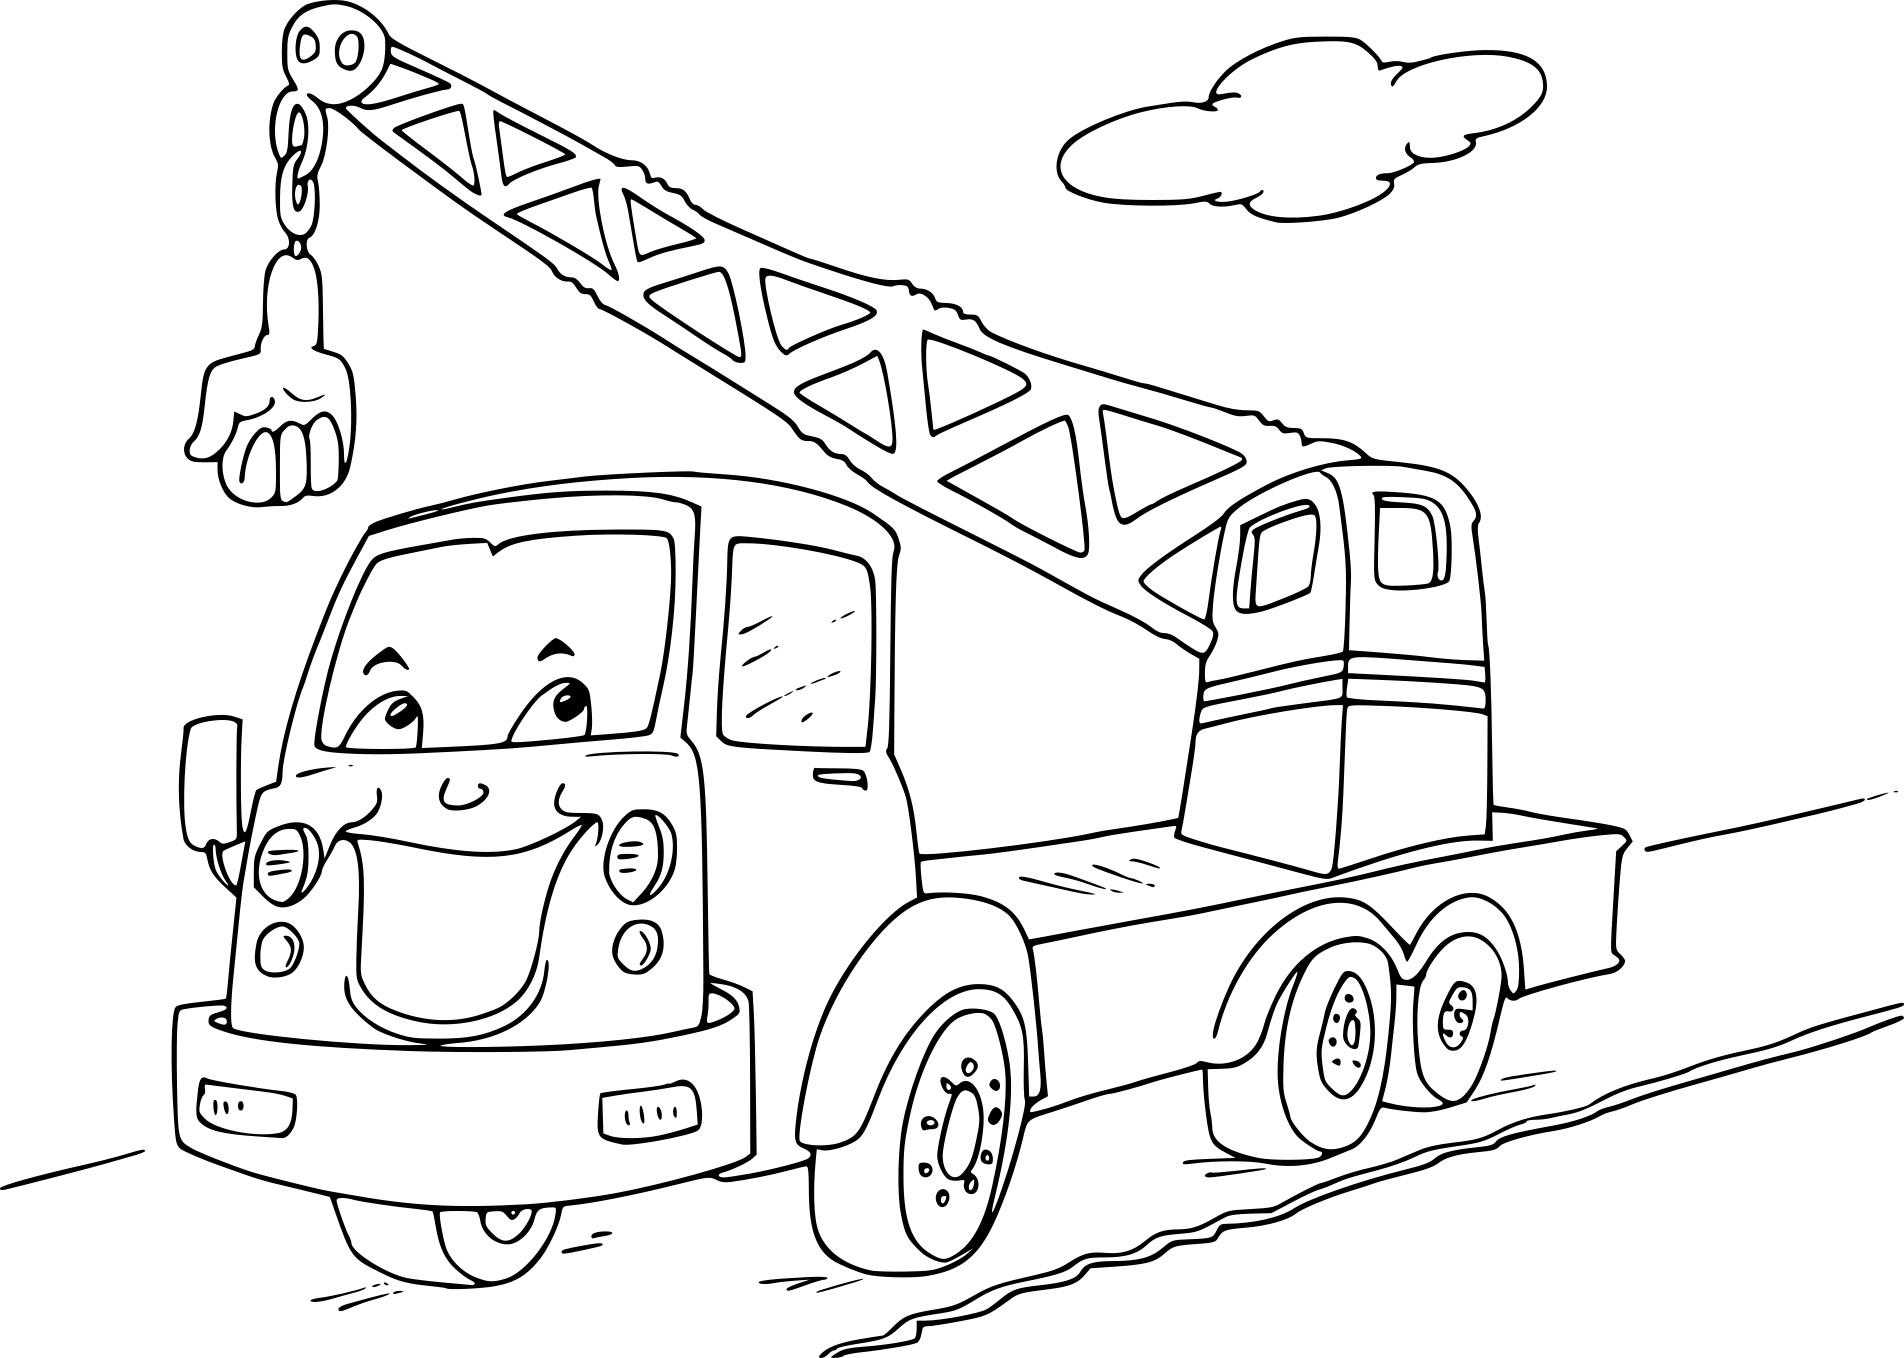 Truck Crane drawing and coloring page